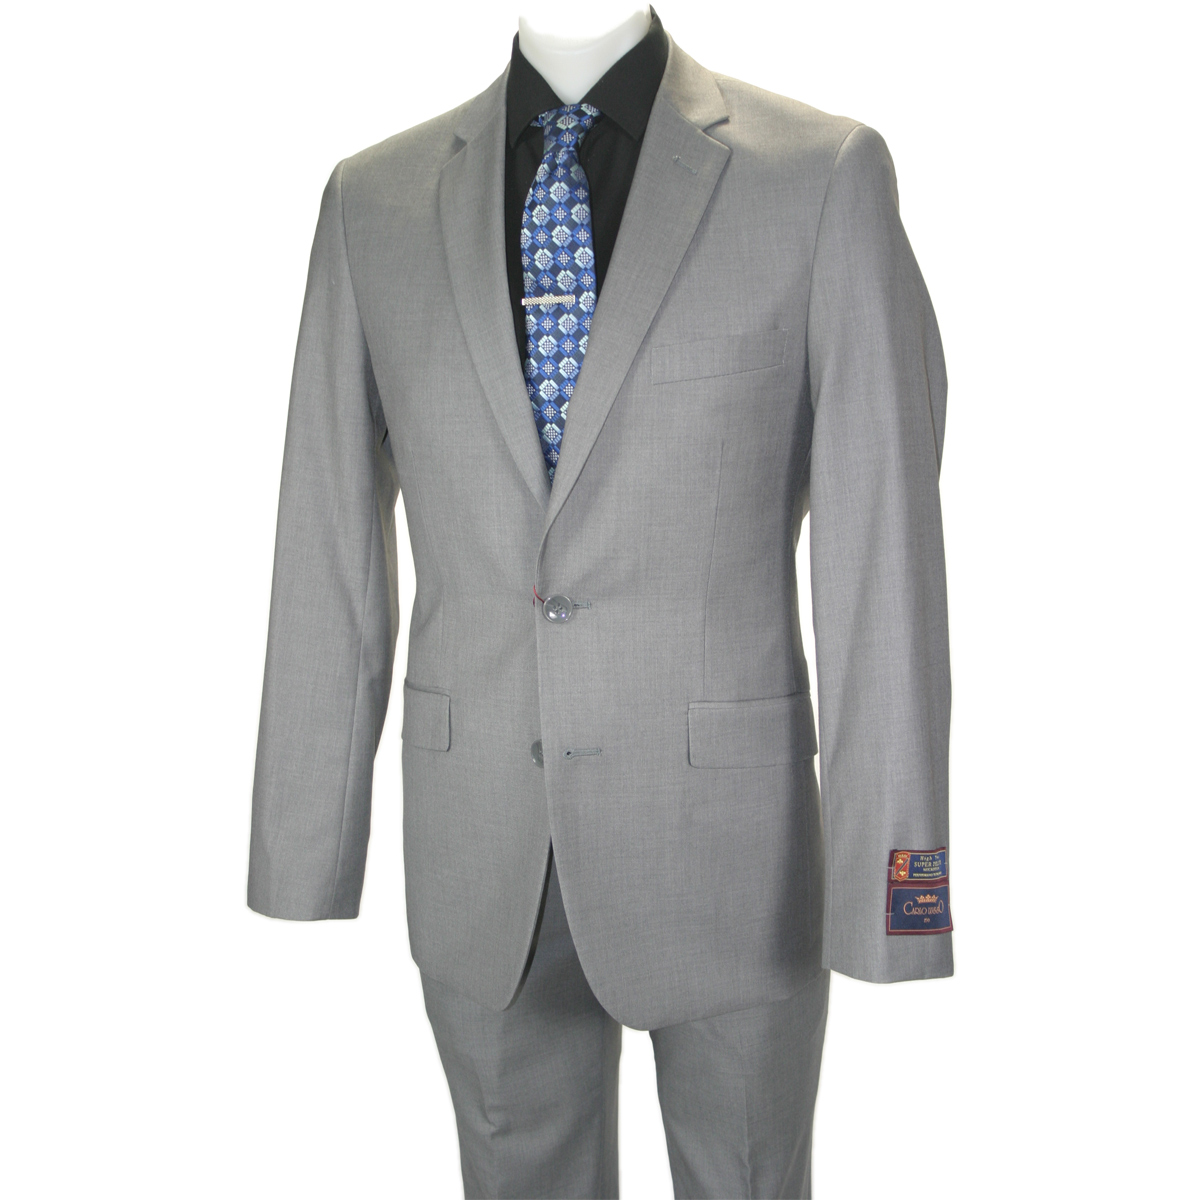 4 Carlo Lusso Suits Package in CA, NY, NJ, IL - Moda Italy Fashion